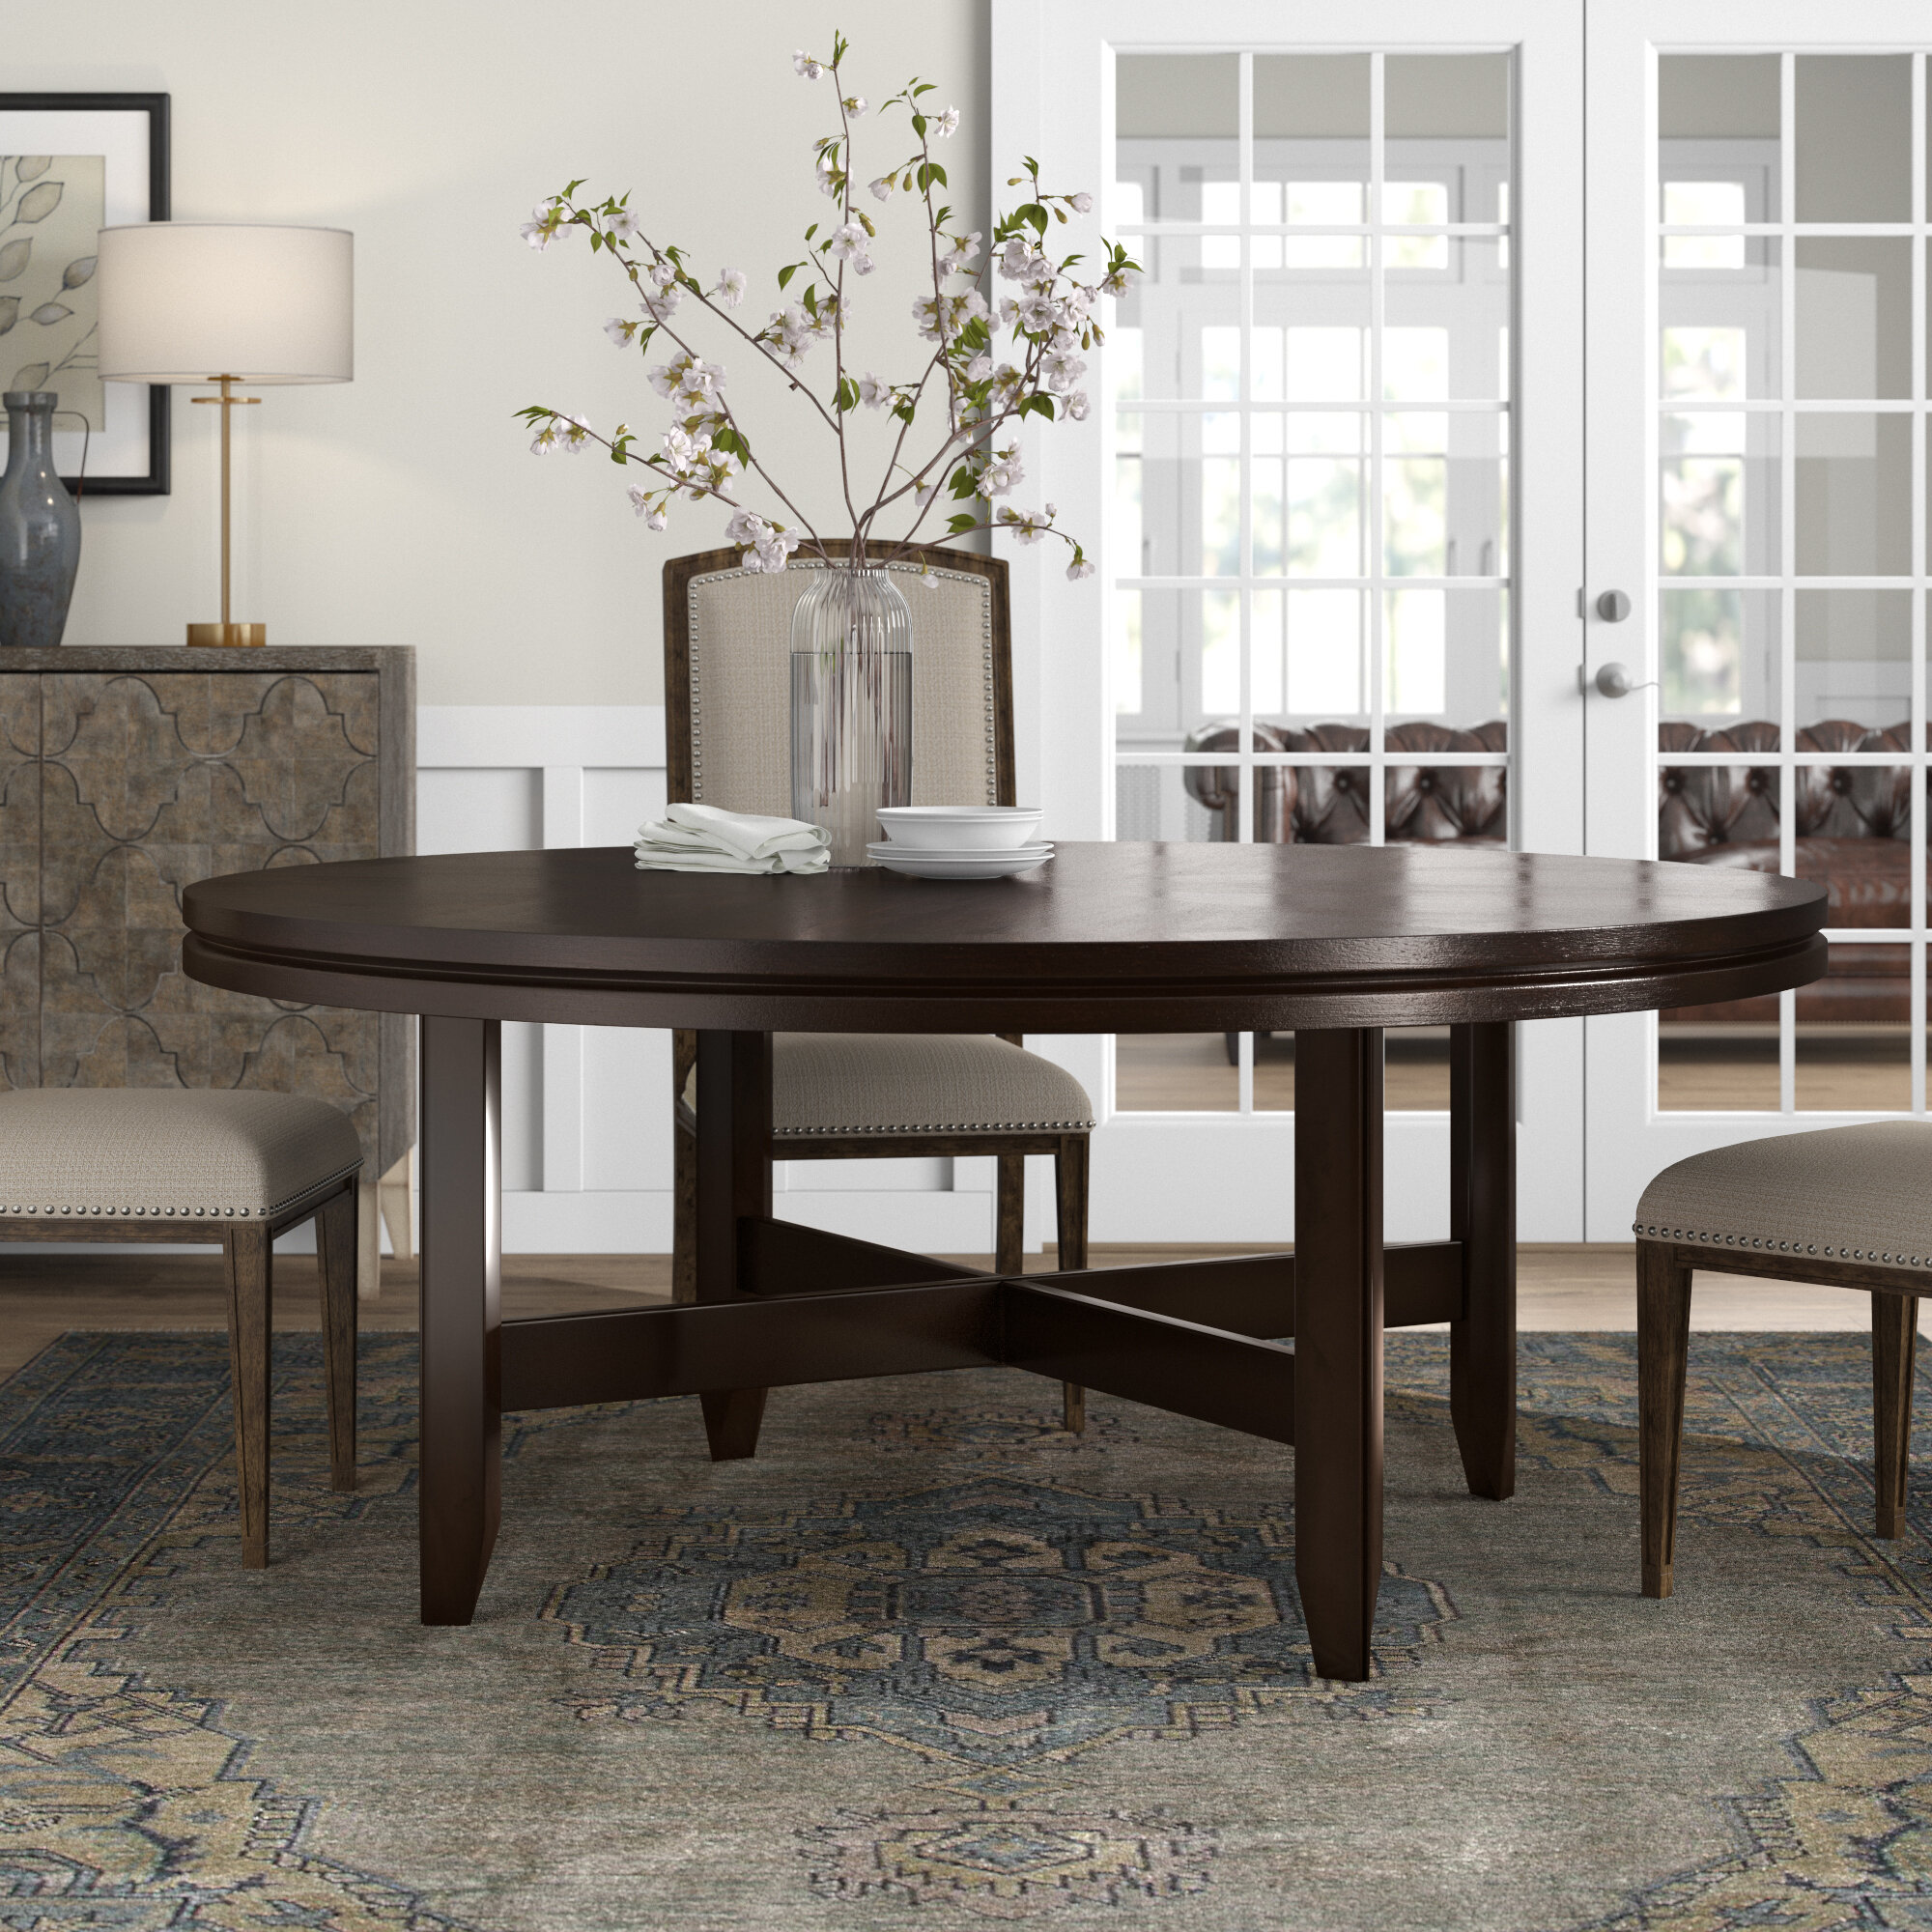 Wayfair   Large Round Kitchen & Dining Tables You'll Love in 20